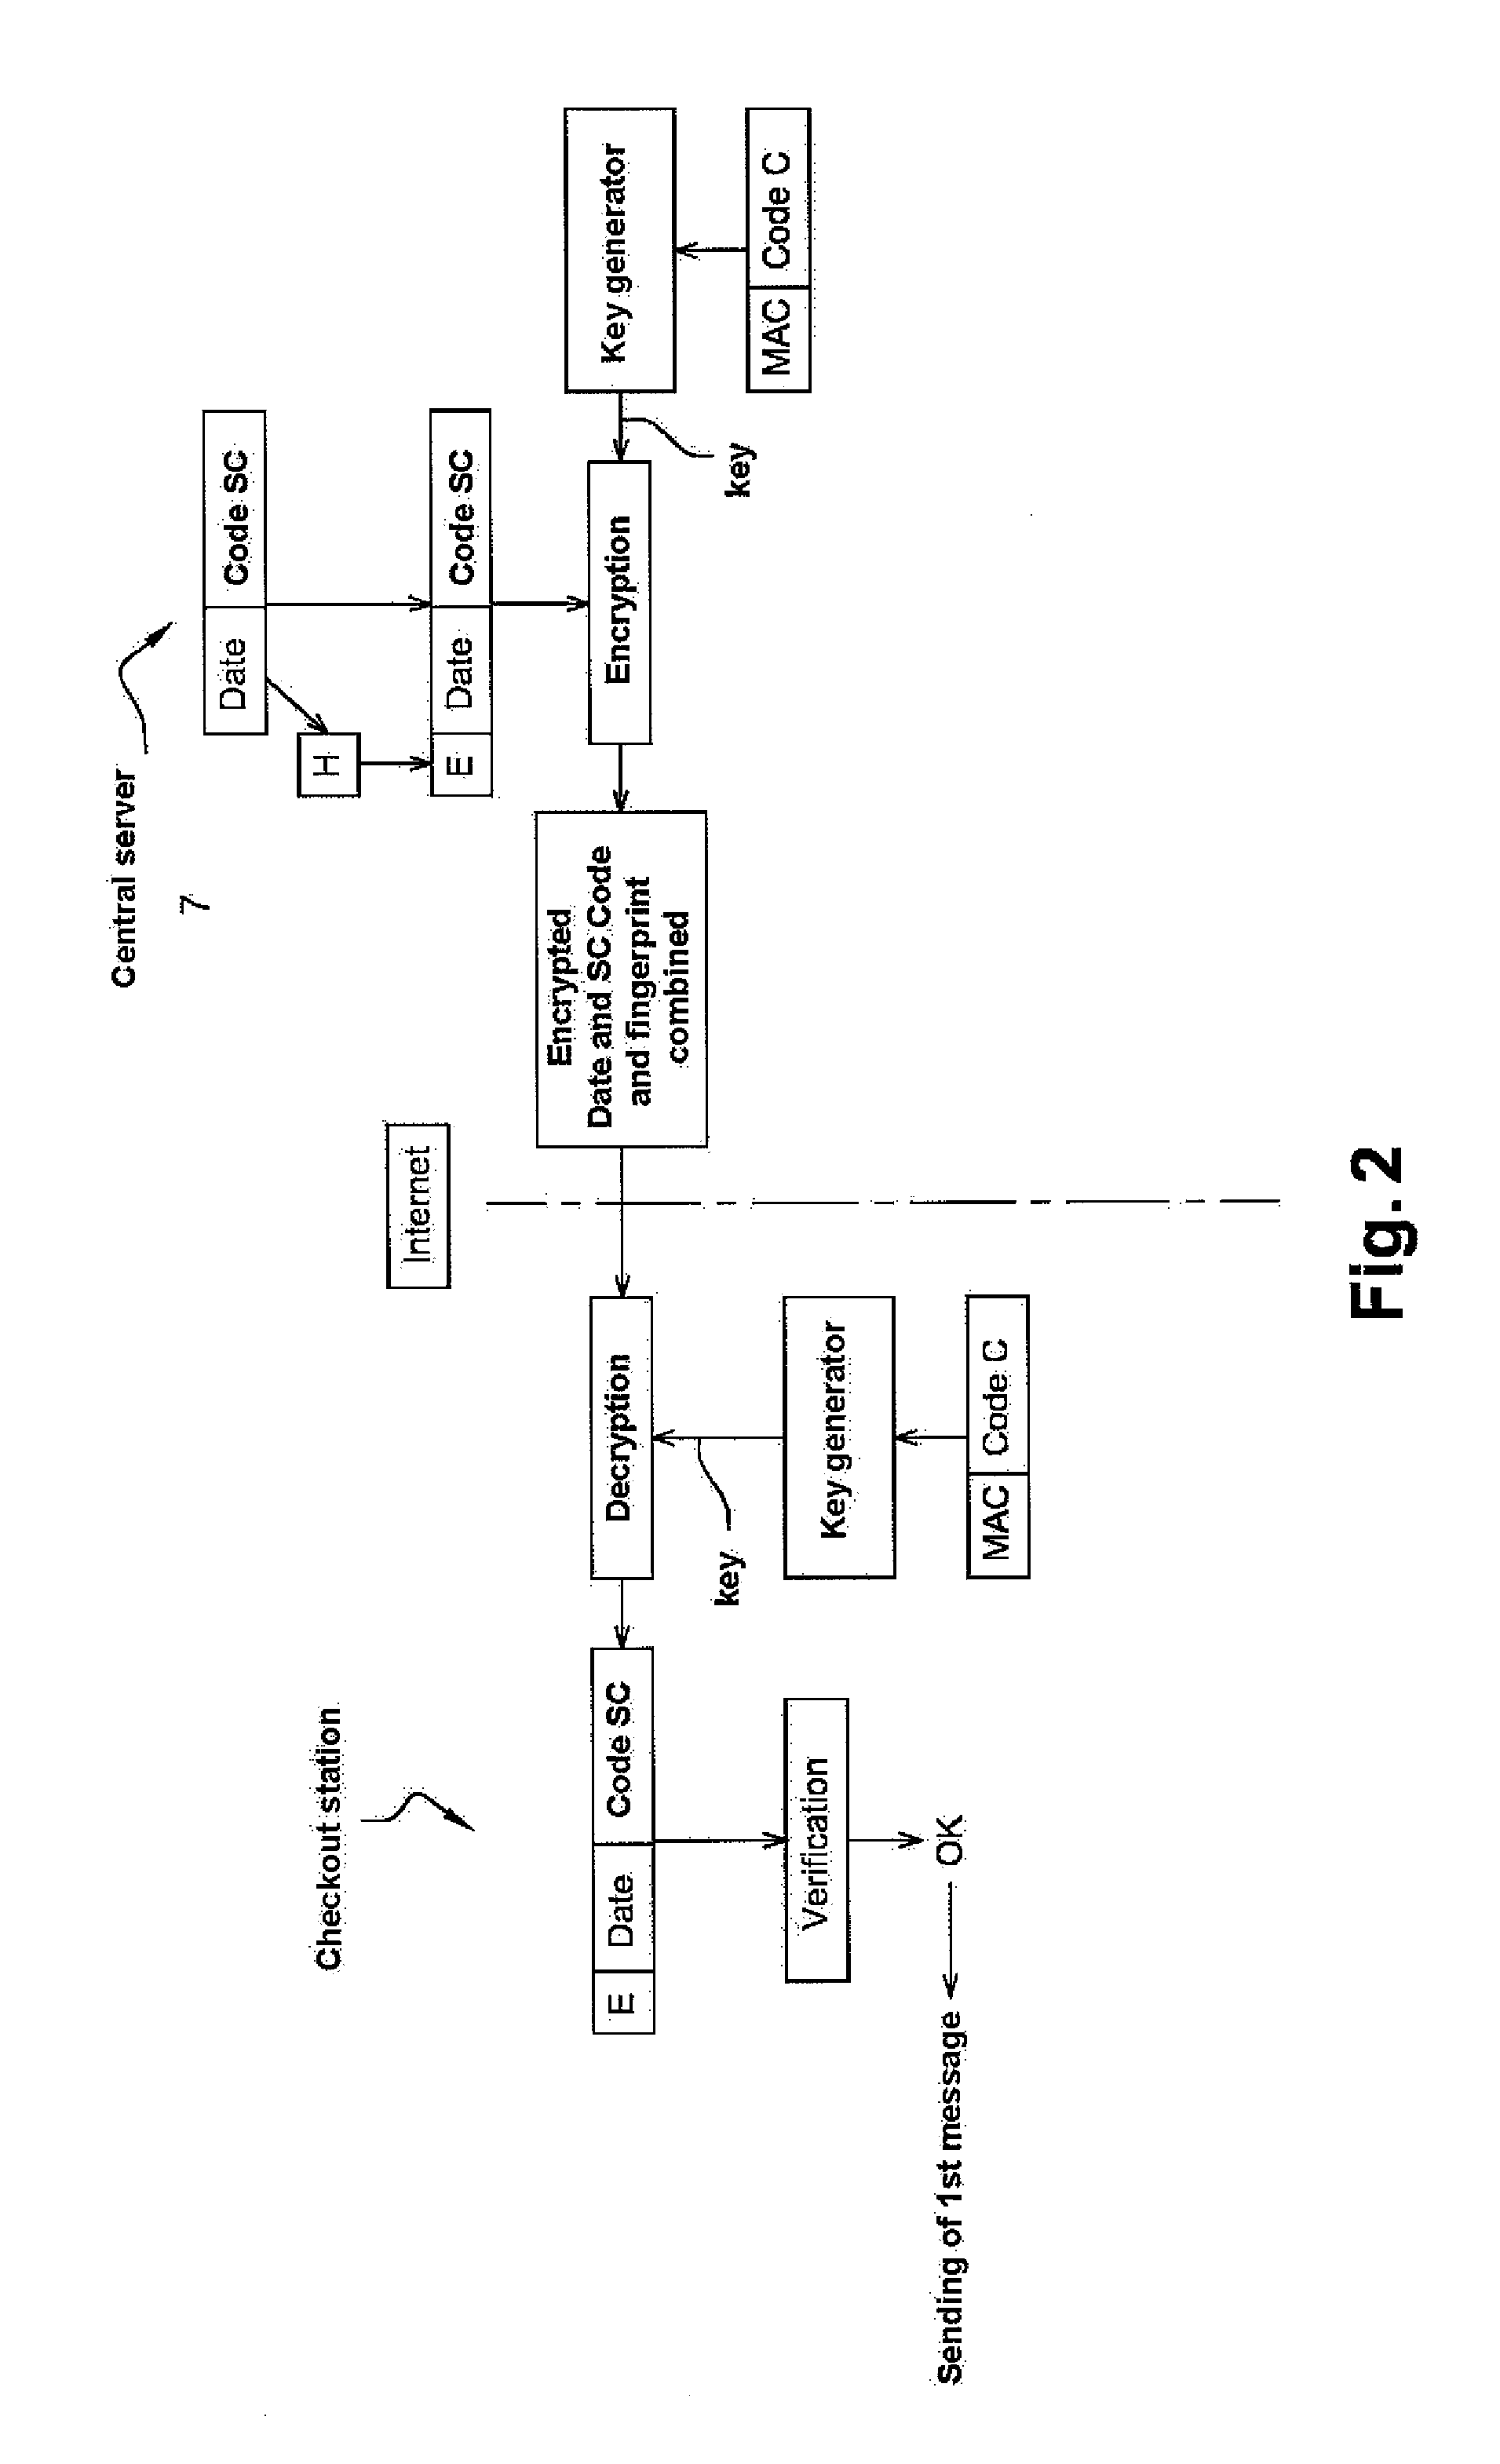 System for exchanging data between at least one sender and one receiver